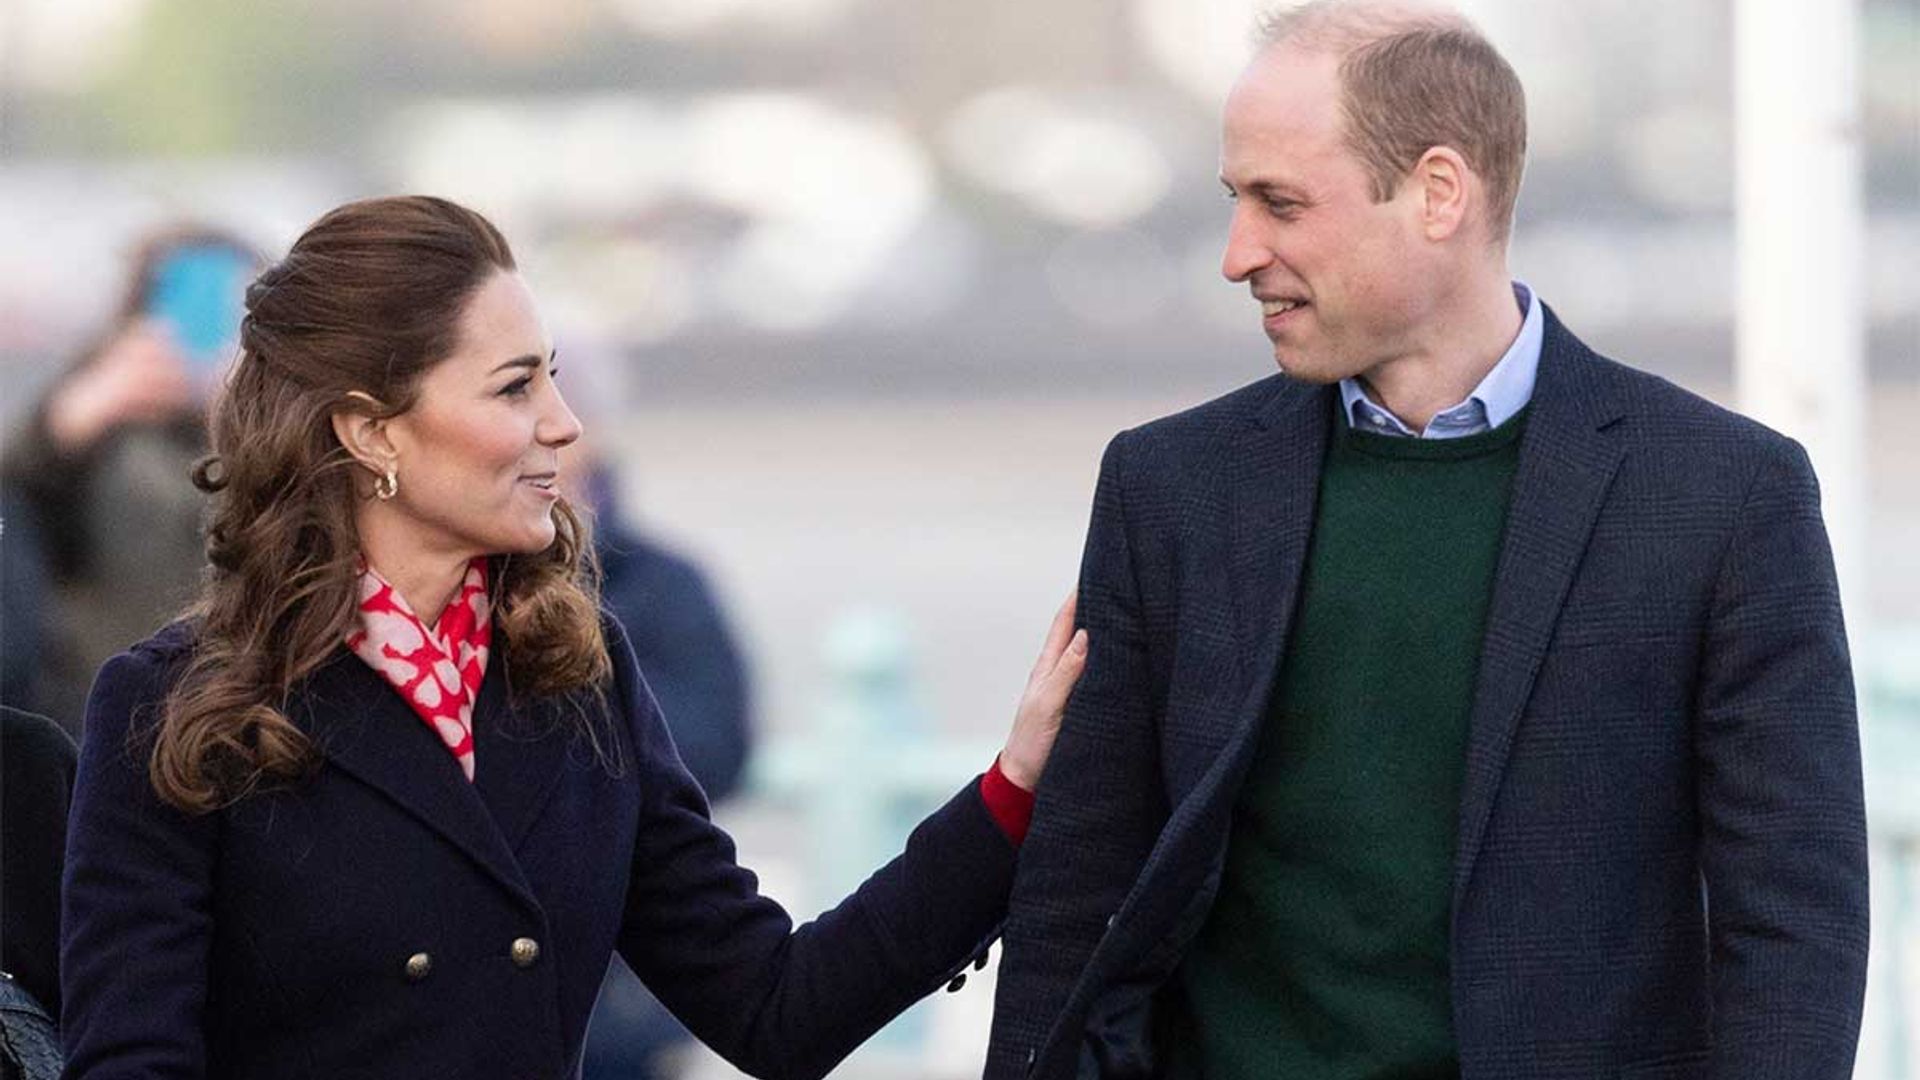 Prince William reveals how wife Kate Middleton supports him through parenthood pressures